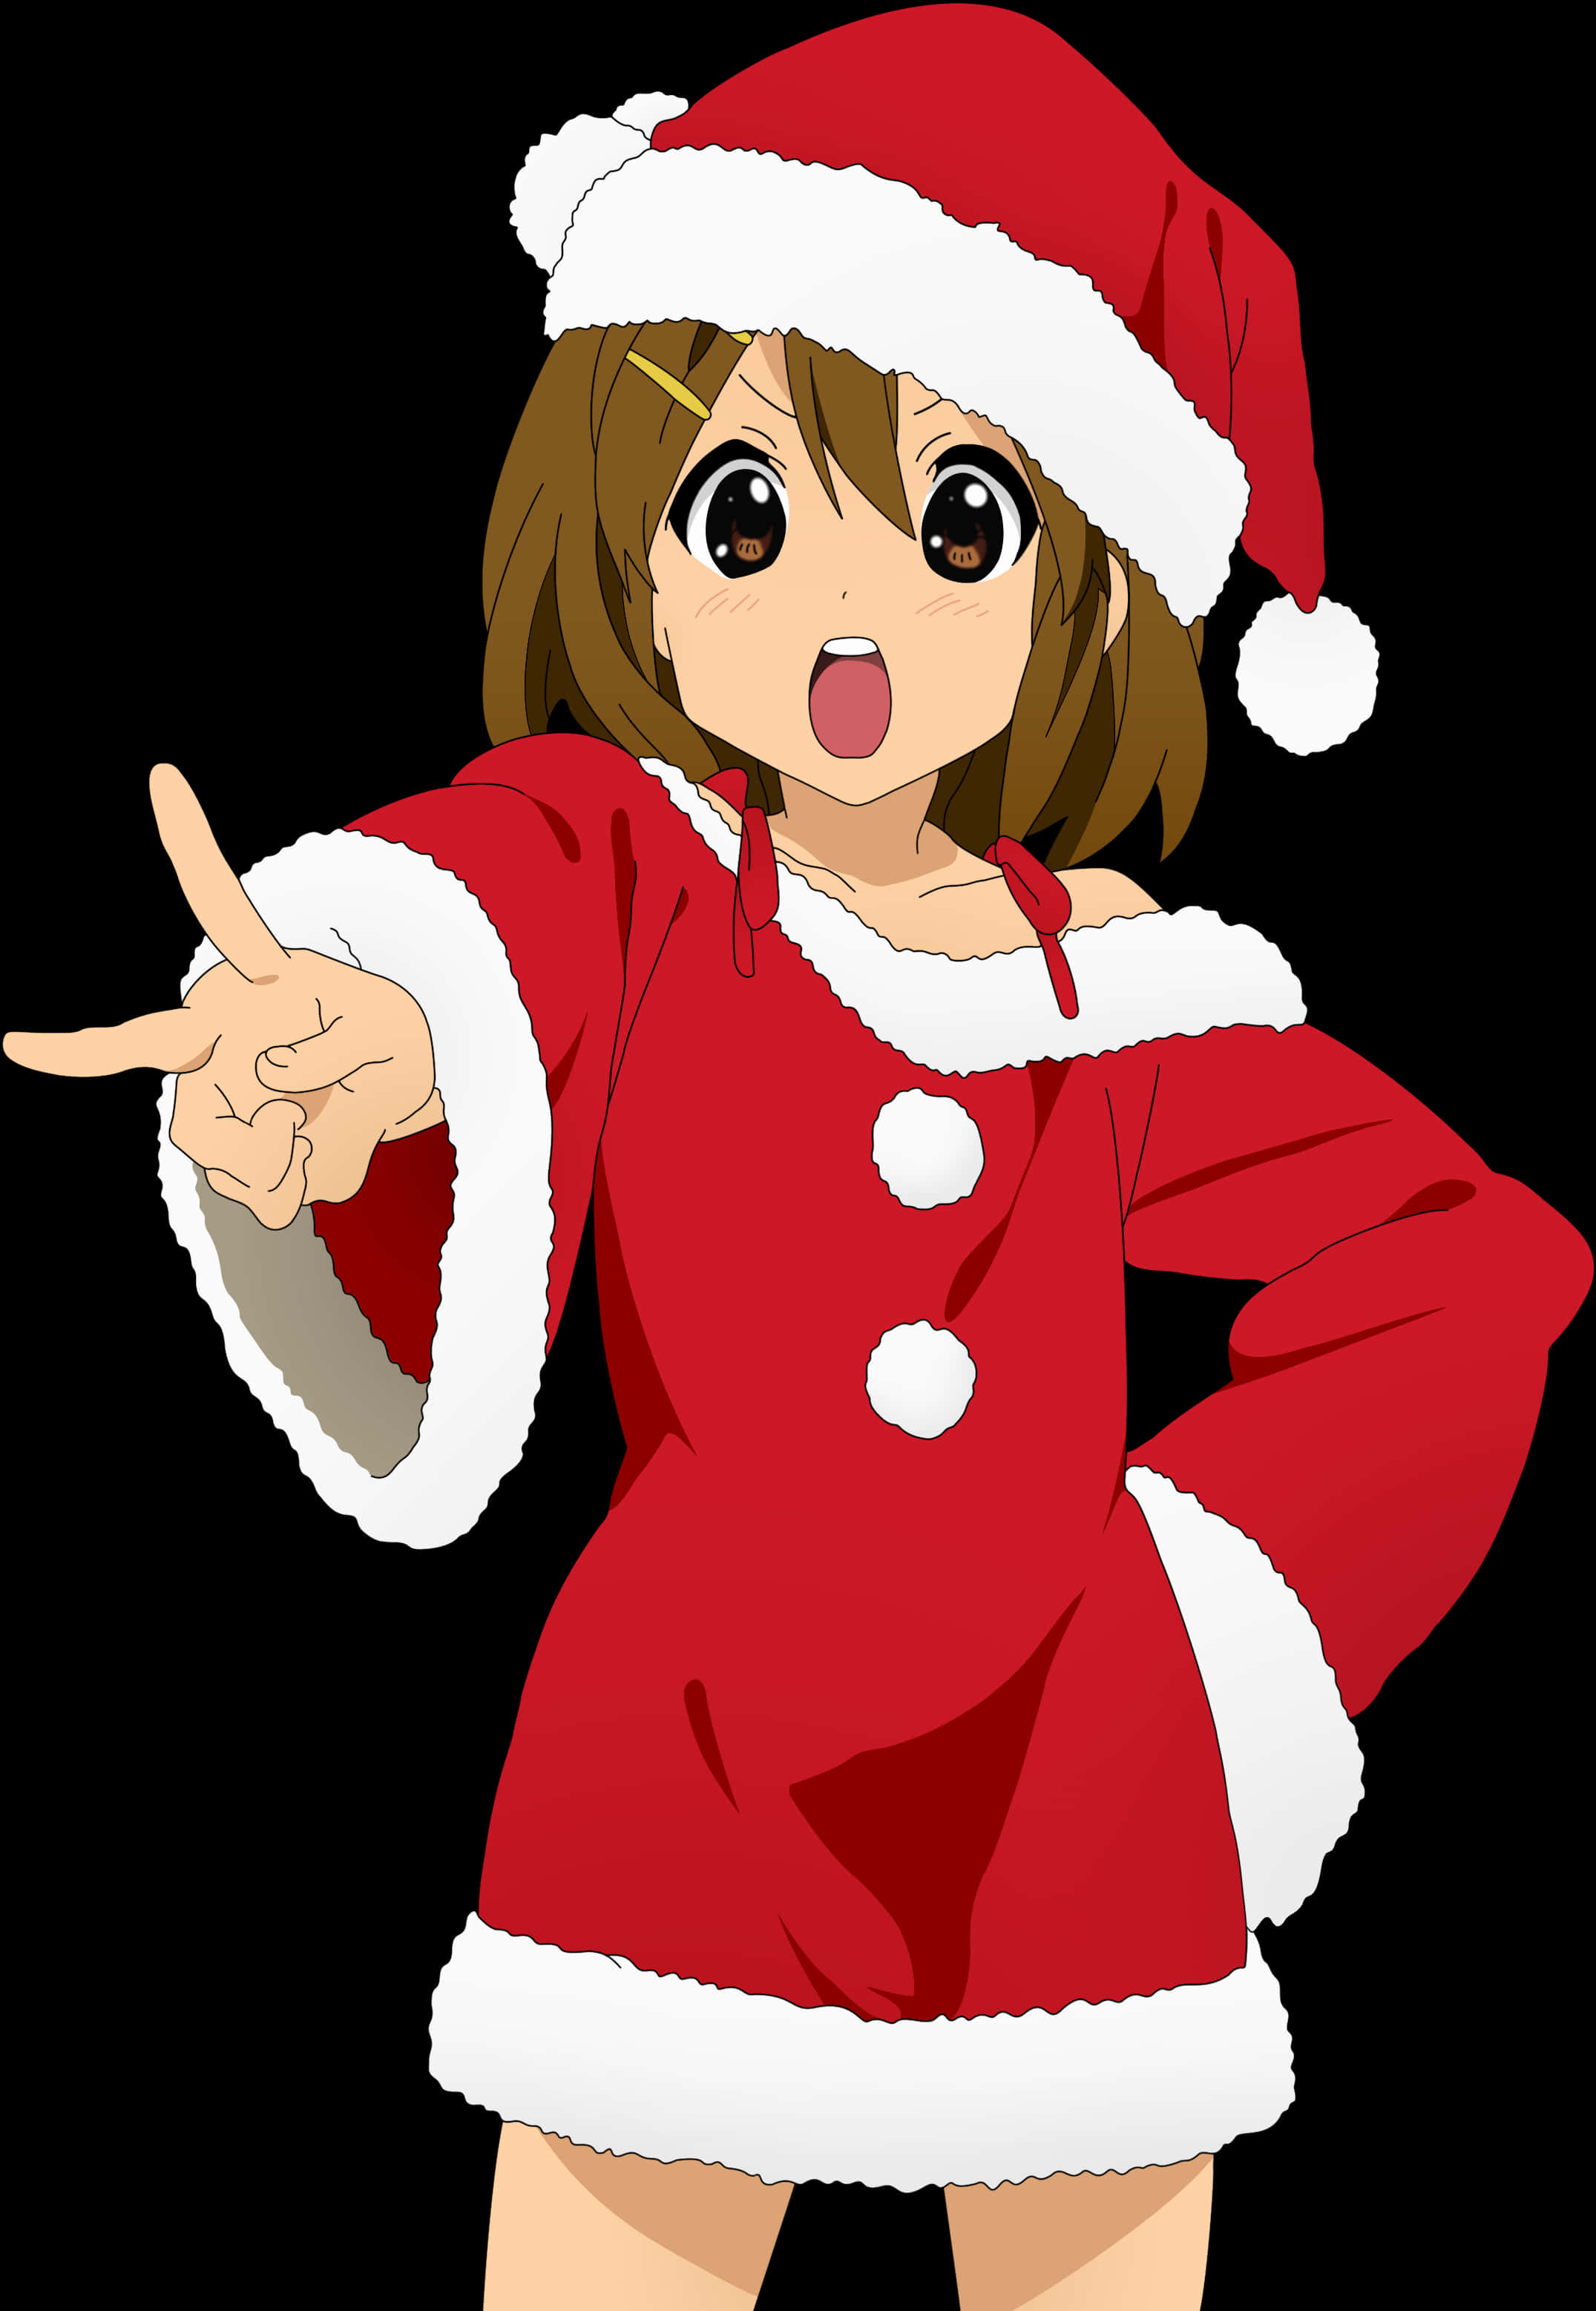 A Cartoon Of A Girl Wearing A Santa Outfit